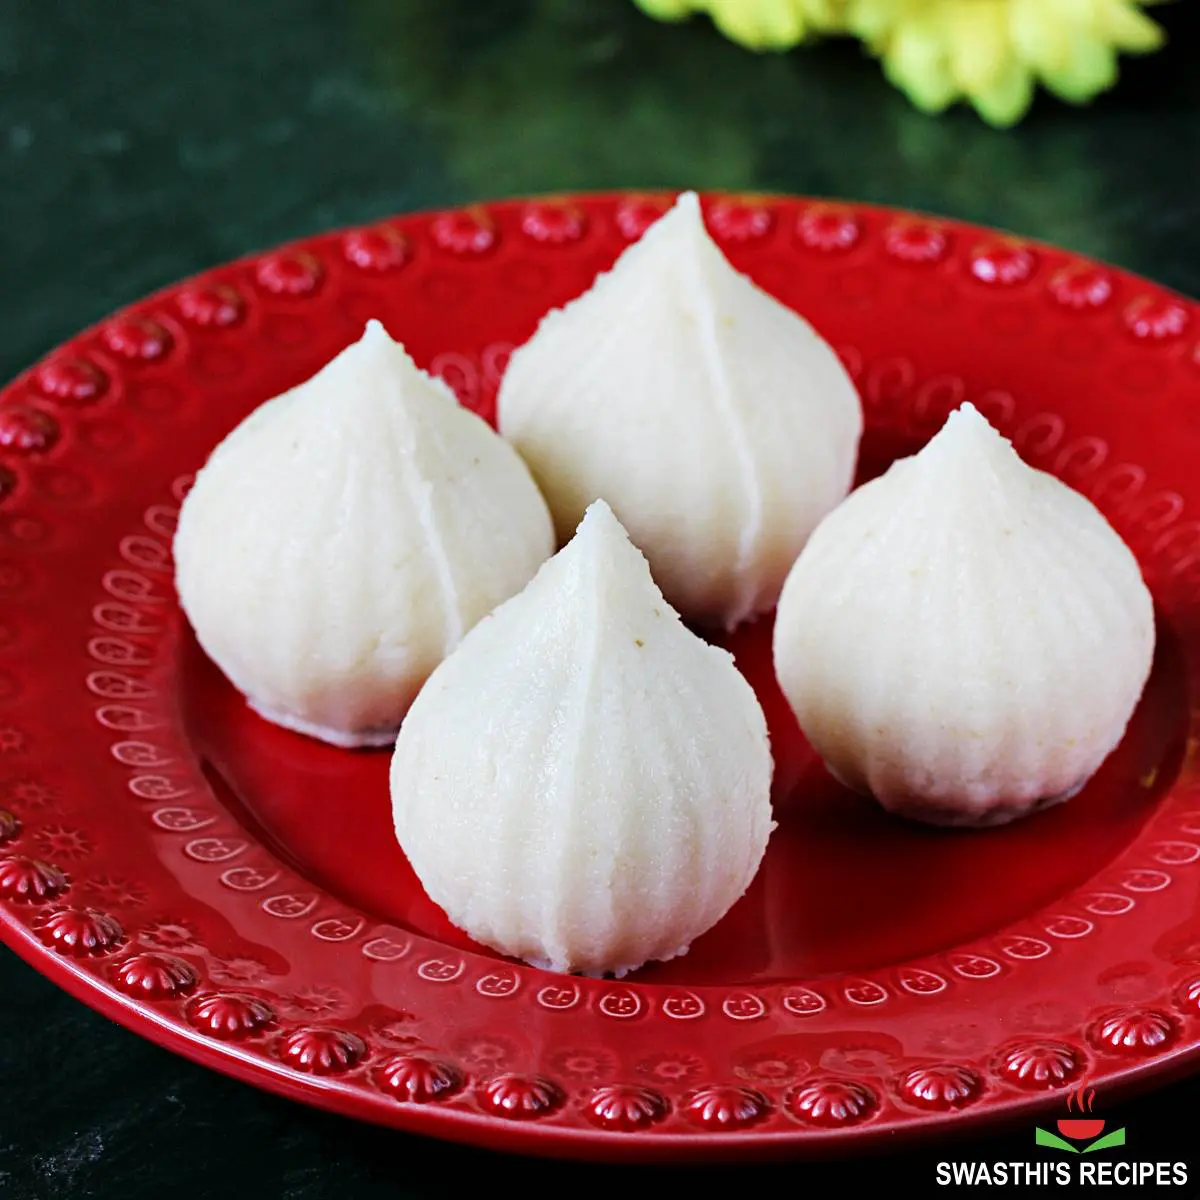 rava modak offered in a red plate